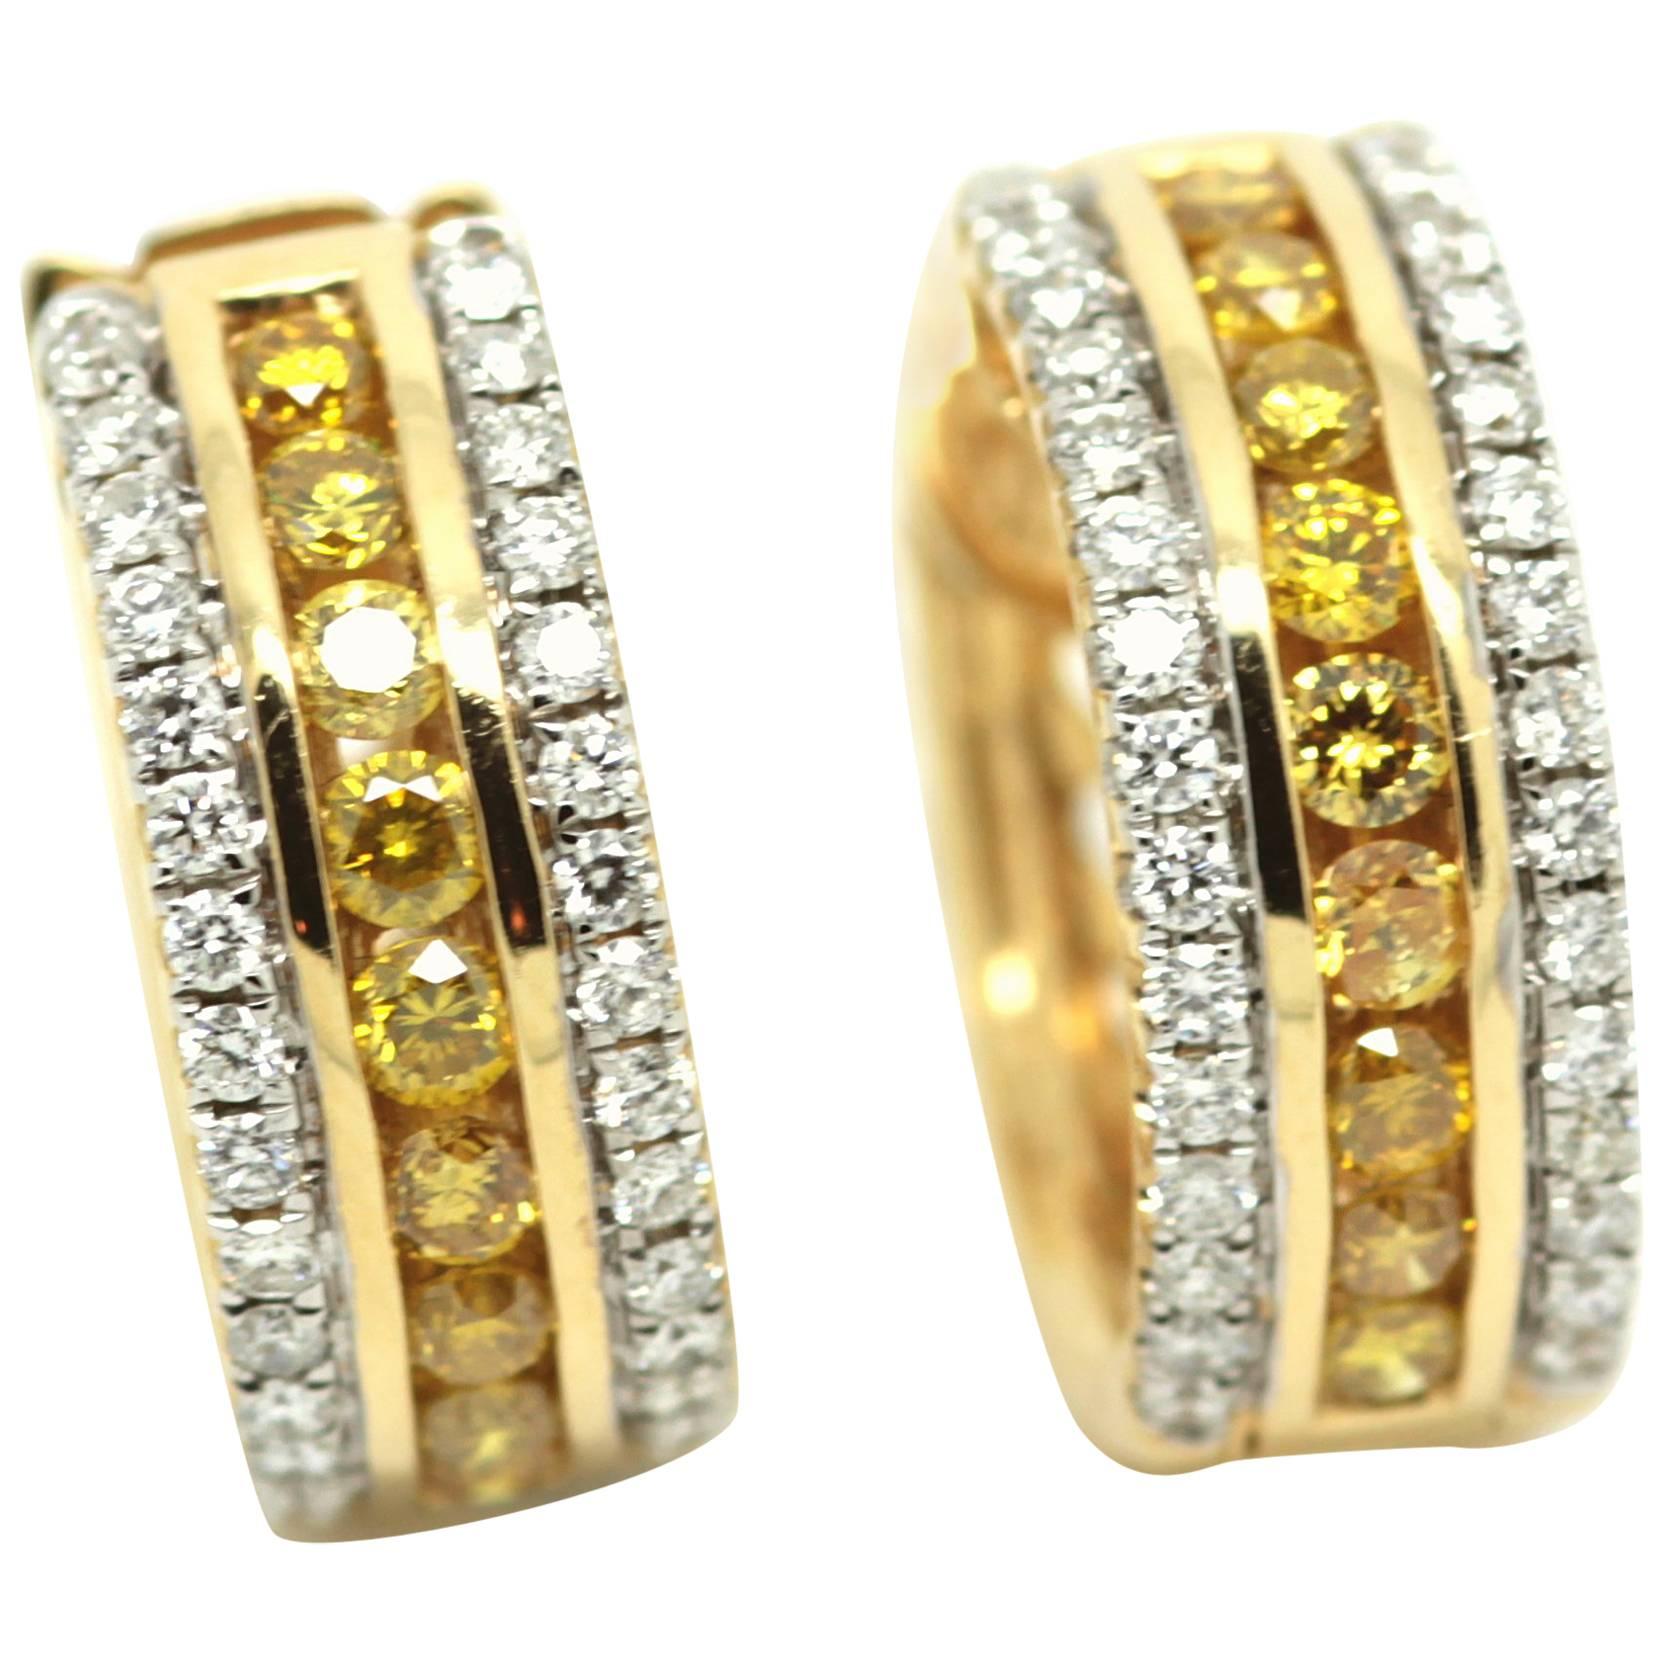 Circular 1.62 Carat Fancy Yellow and White Diamond Earrings For Sale